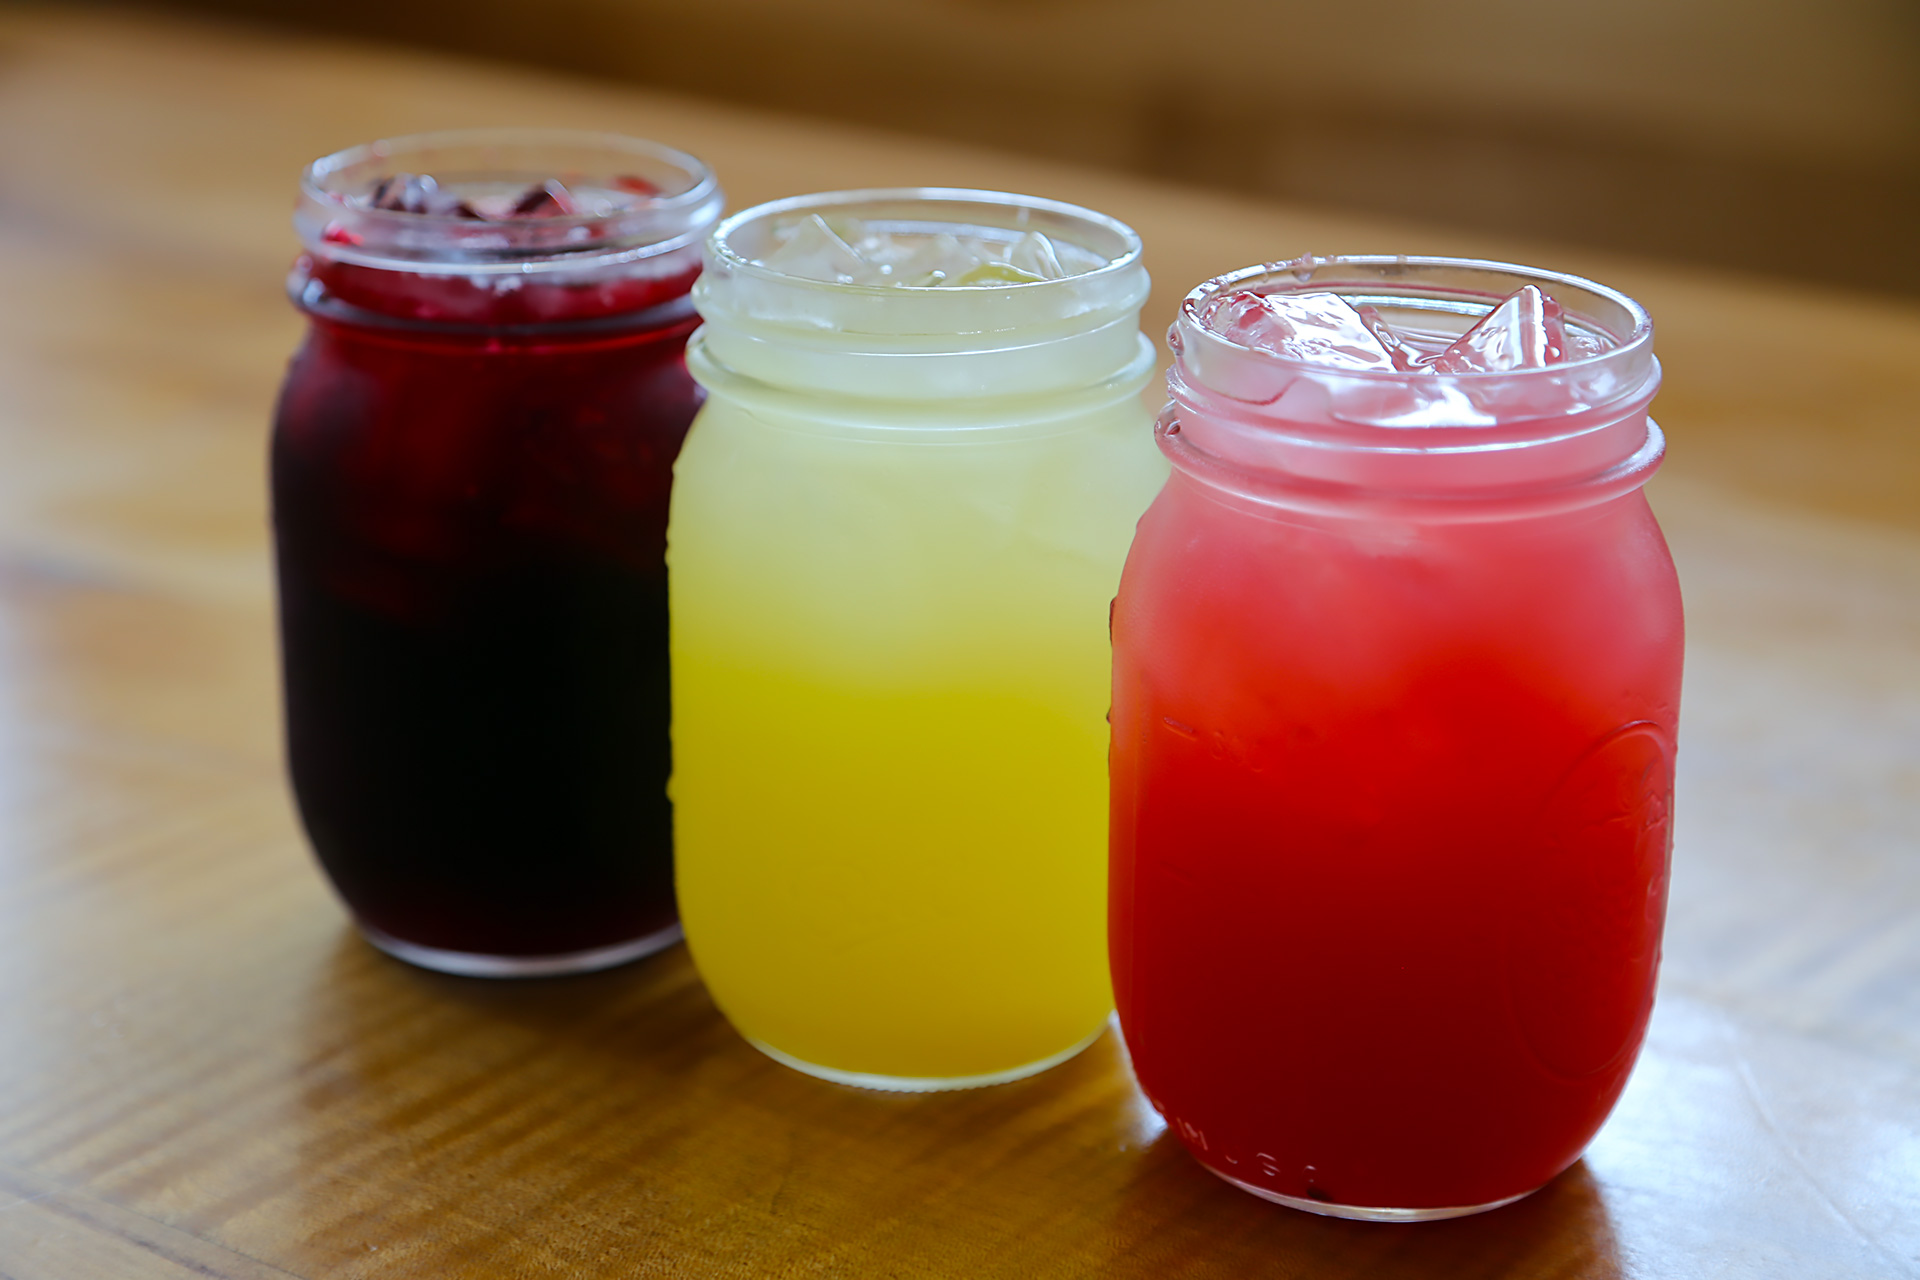 Agua frescas are housemade: jimica (hibiscus), pineapple and watermelon.